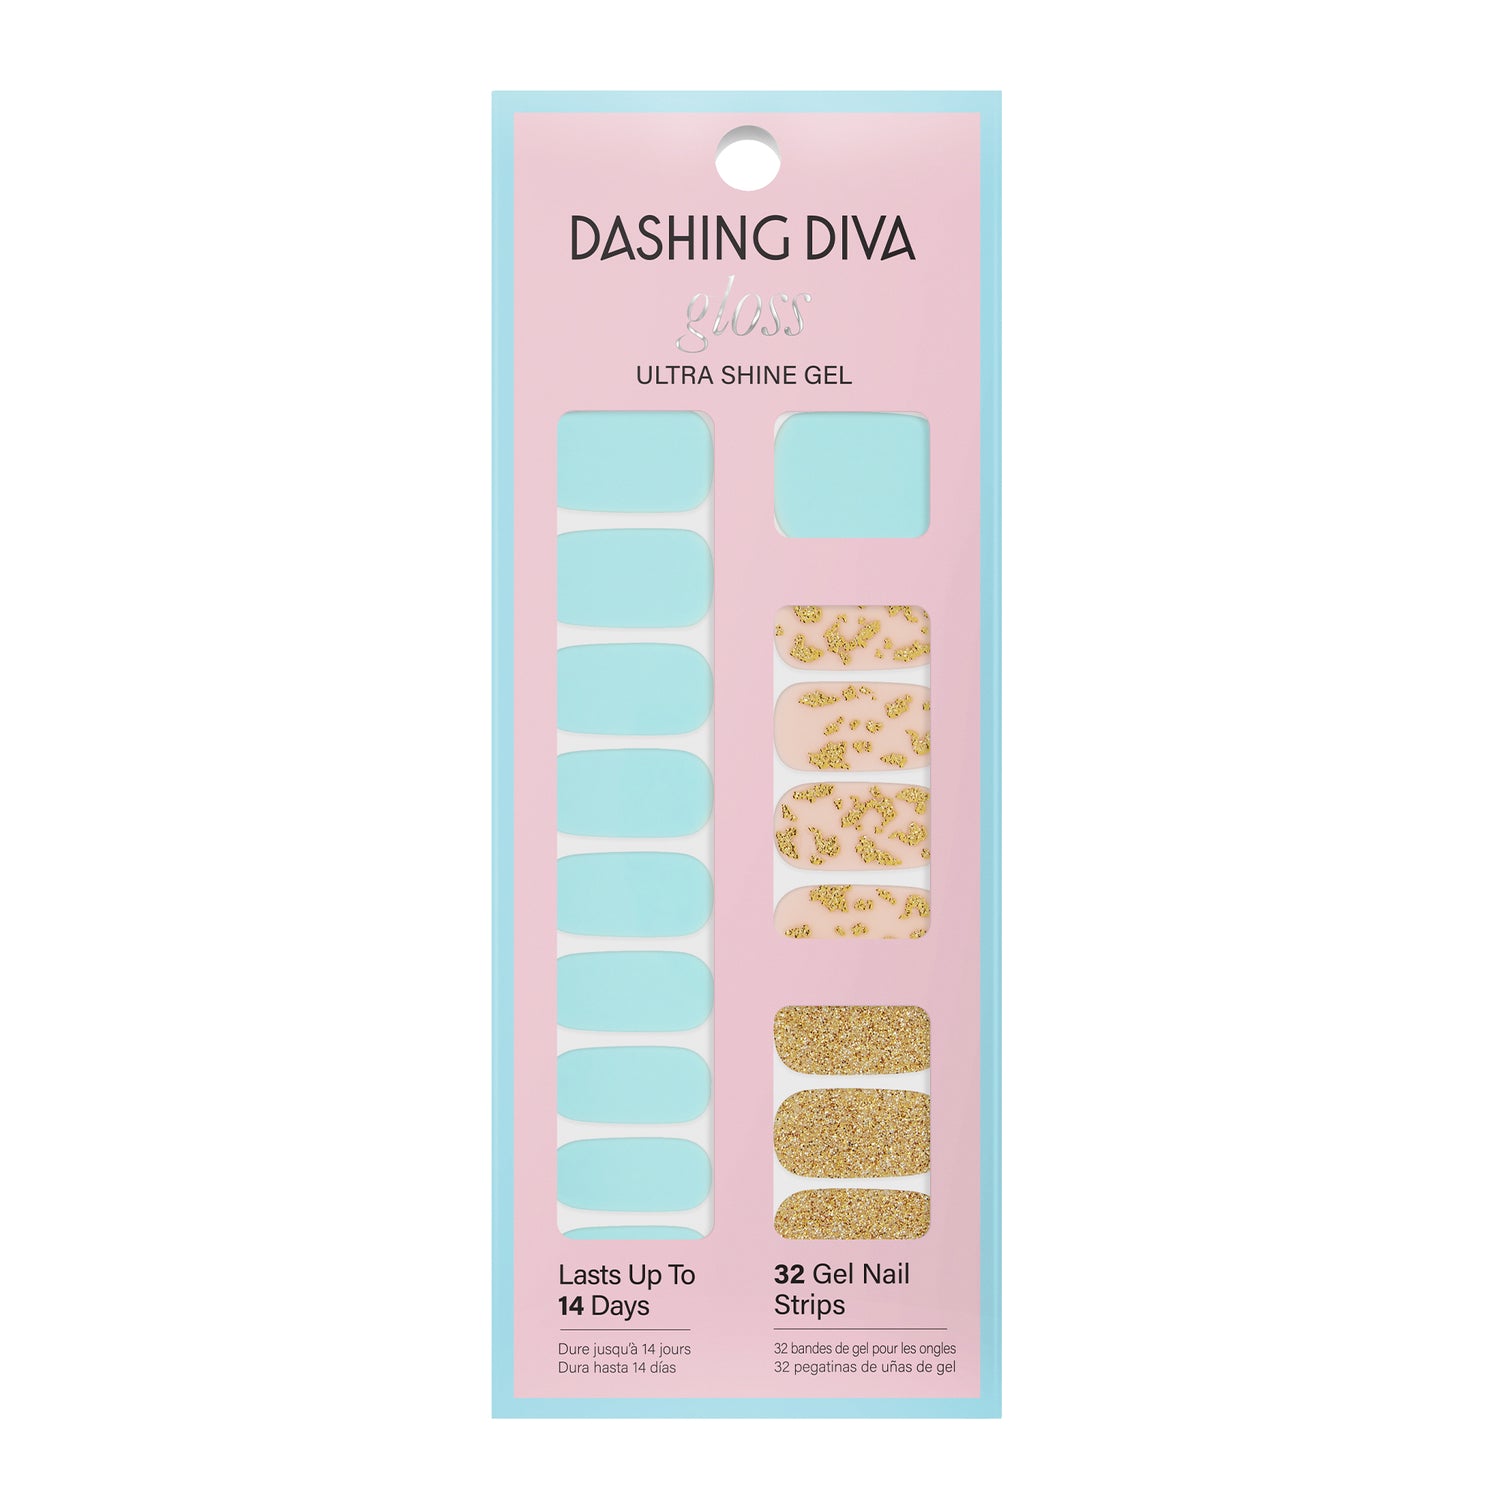 Aqua blue and nude pink gel nail strips featuring gold glitter and gold foil accents with a glossy, high-shine finish.